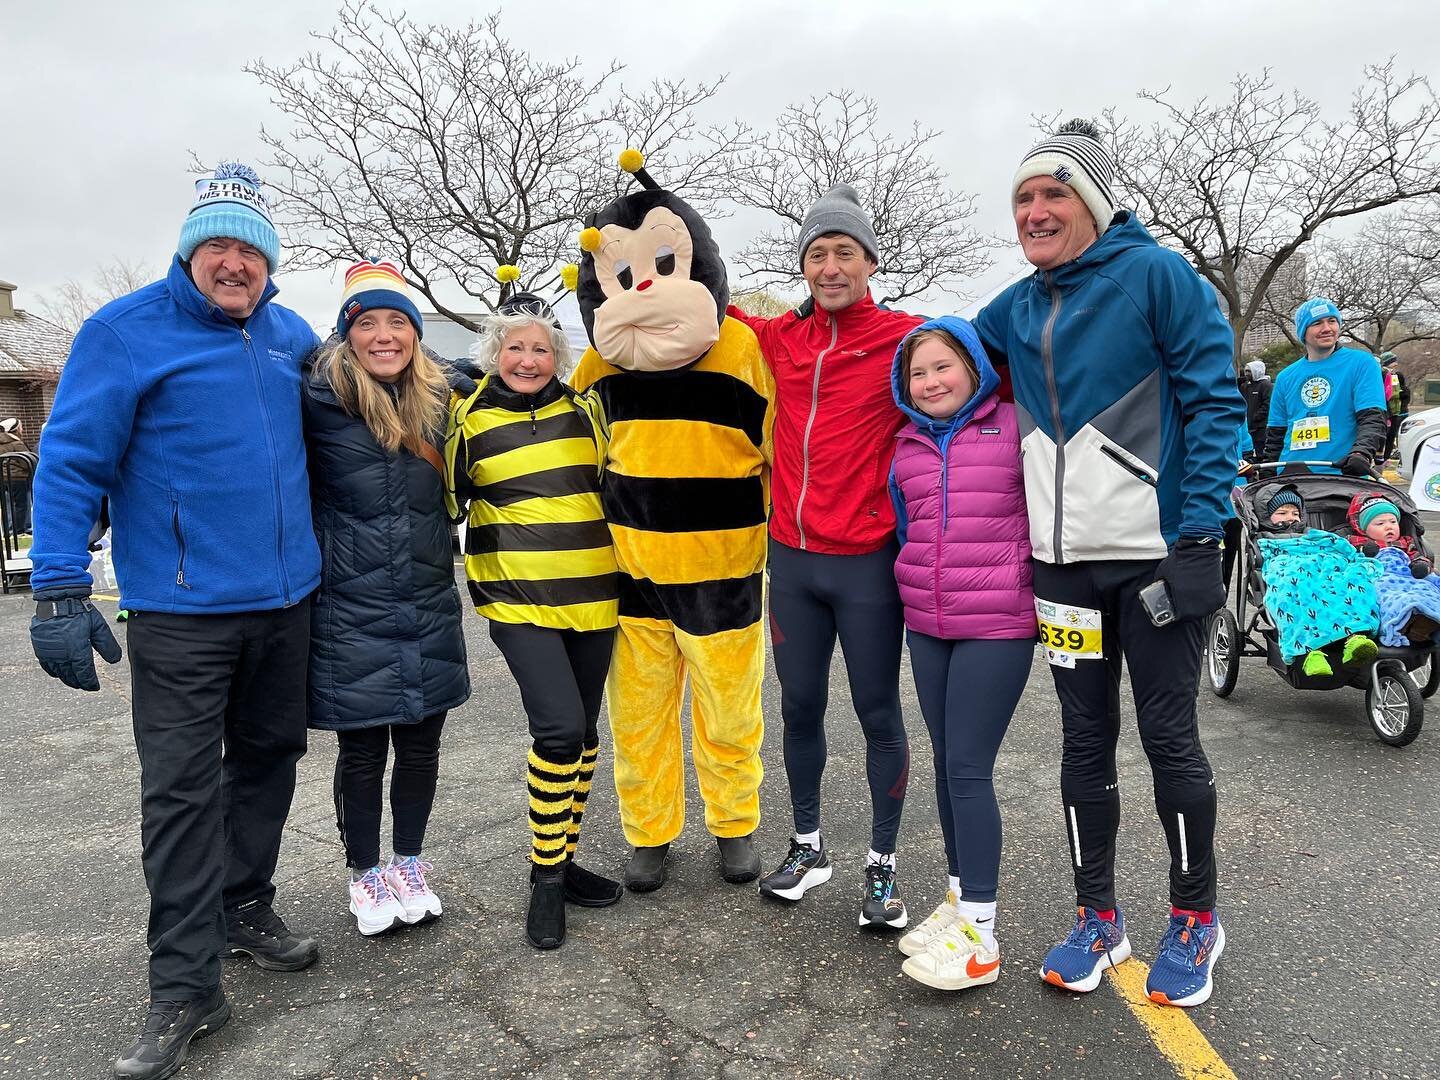 What an amazing way to celebrate Earth Day! Joined fellow community members at the Bee Run at Boom Island and the clean-up event at Pearl Park. It was great to see so many families and friends participate in these events while also making a positive 